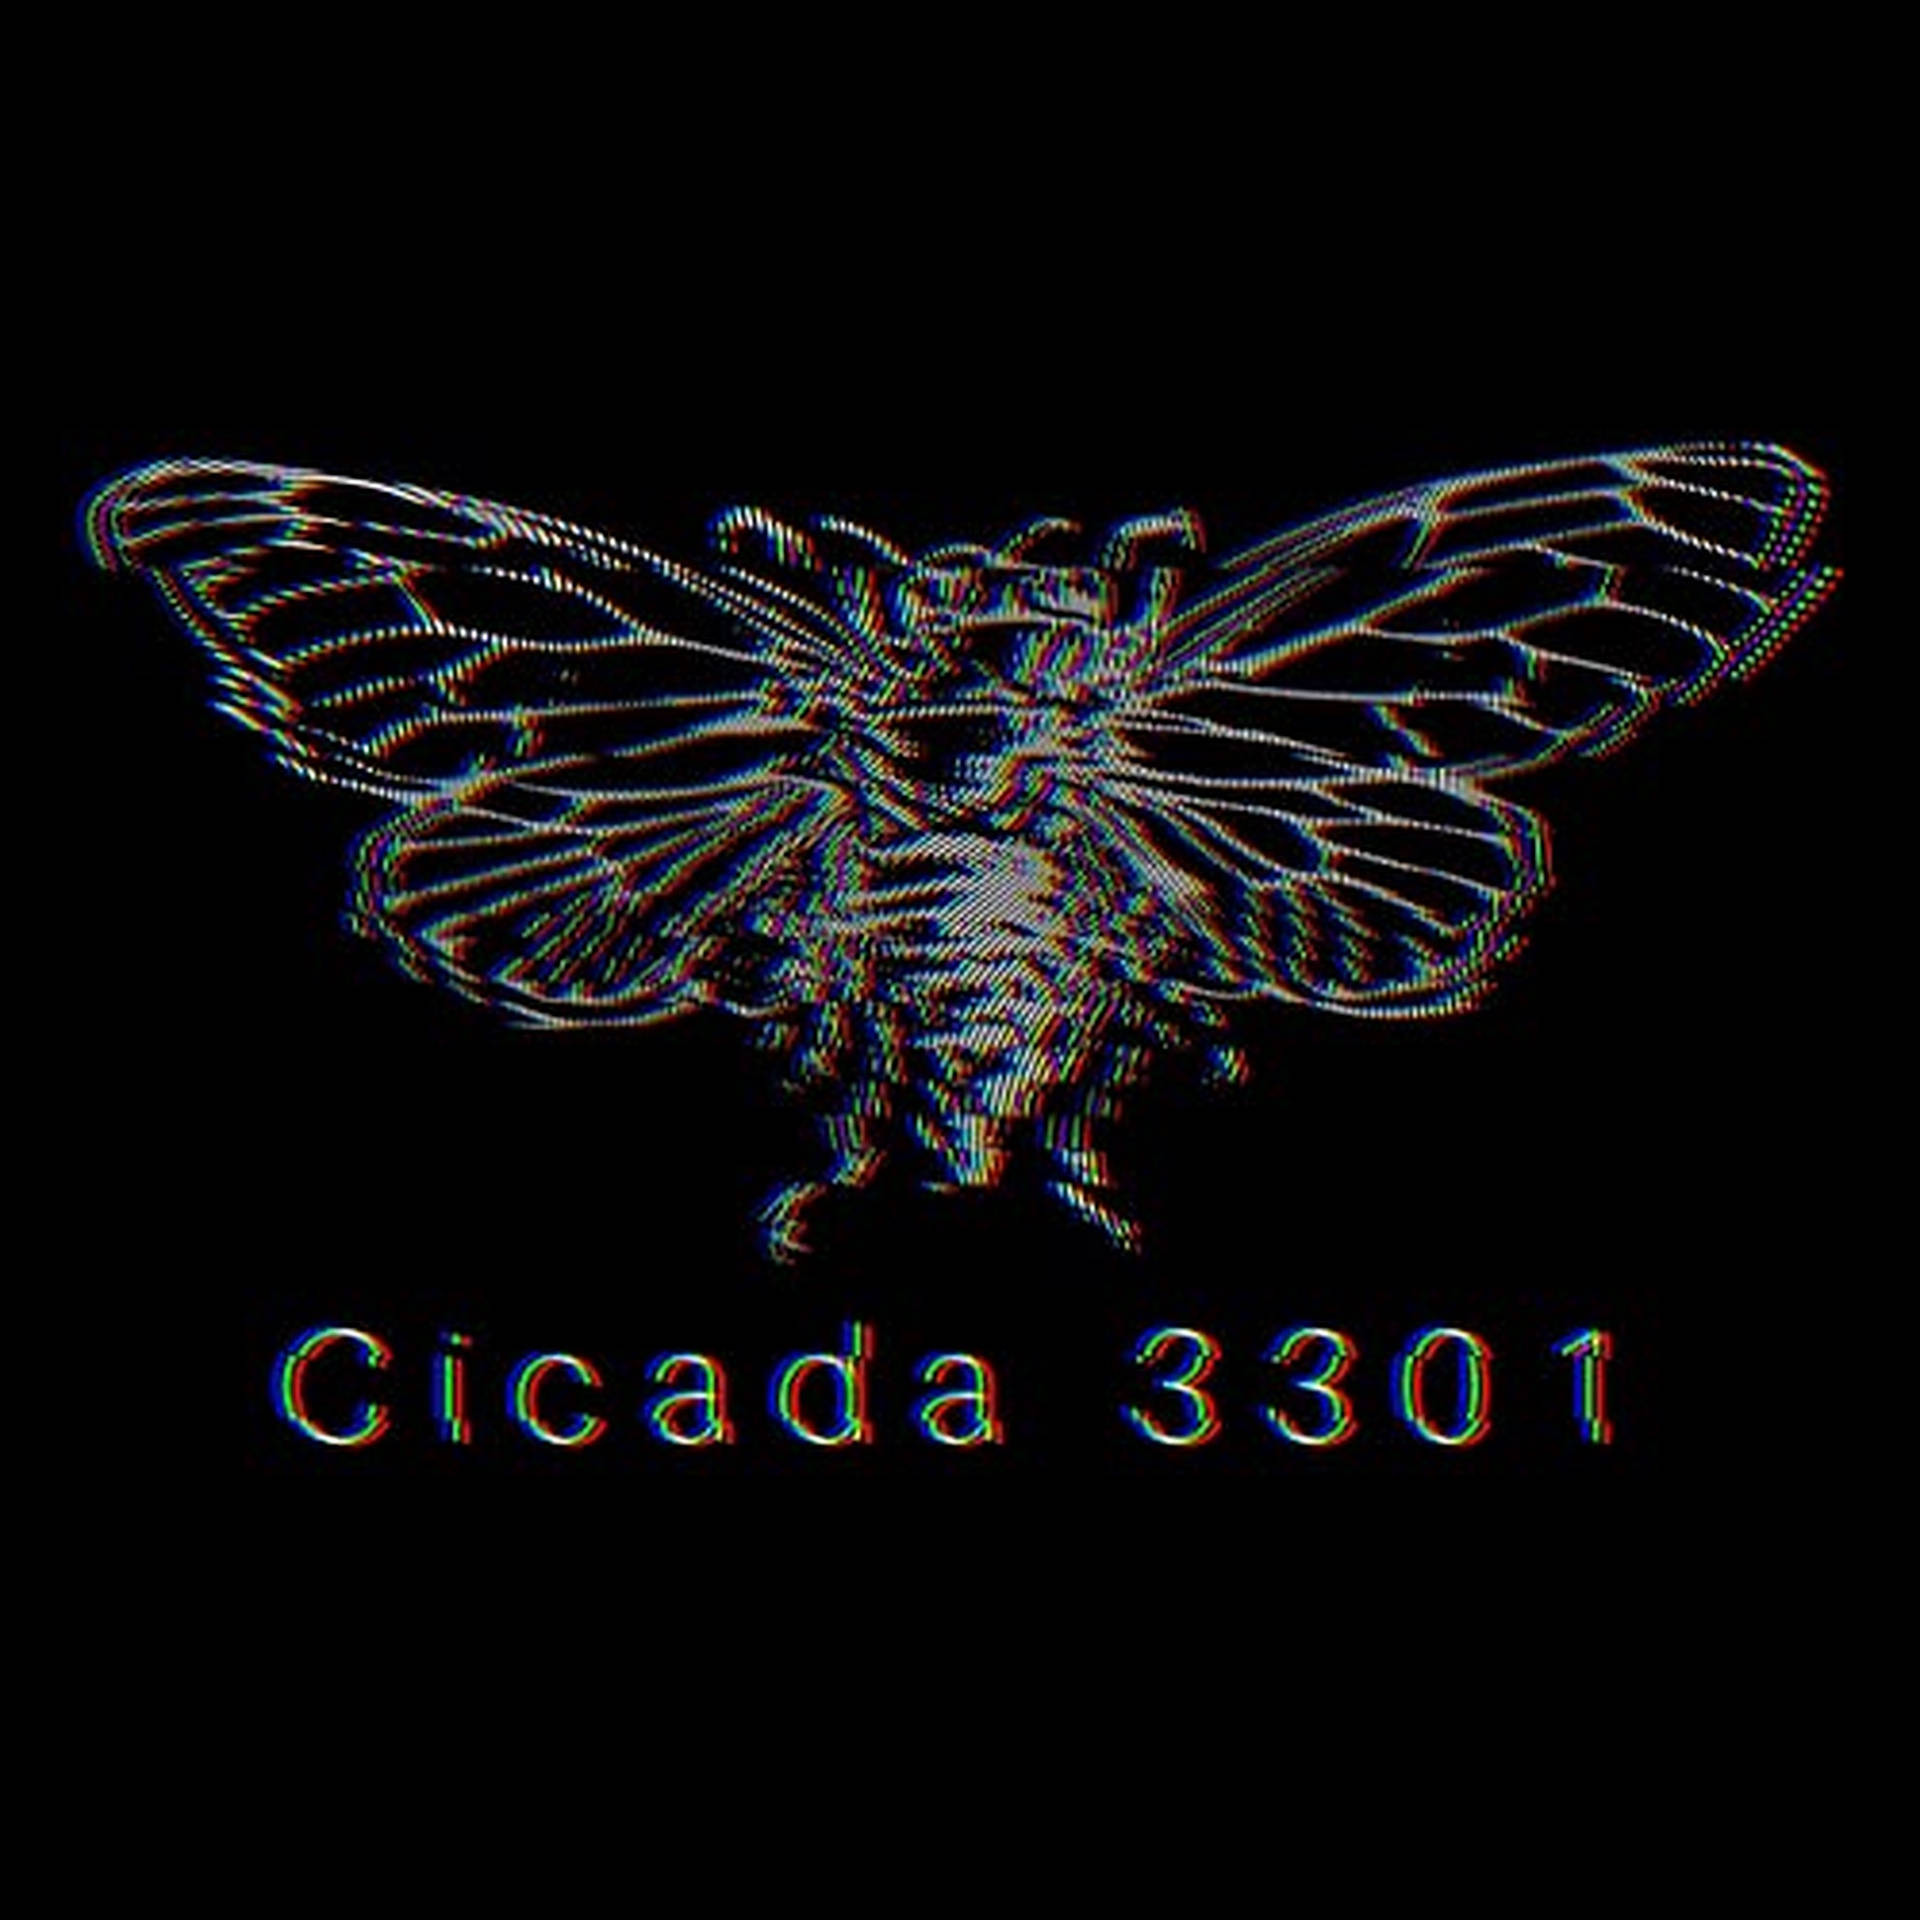 Mysterious Cicada 3301 with Glitch Effect Wallpaper